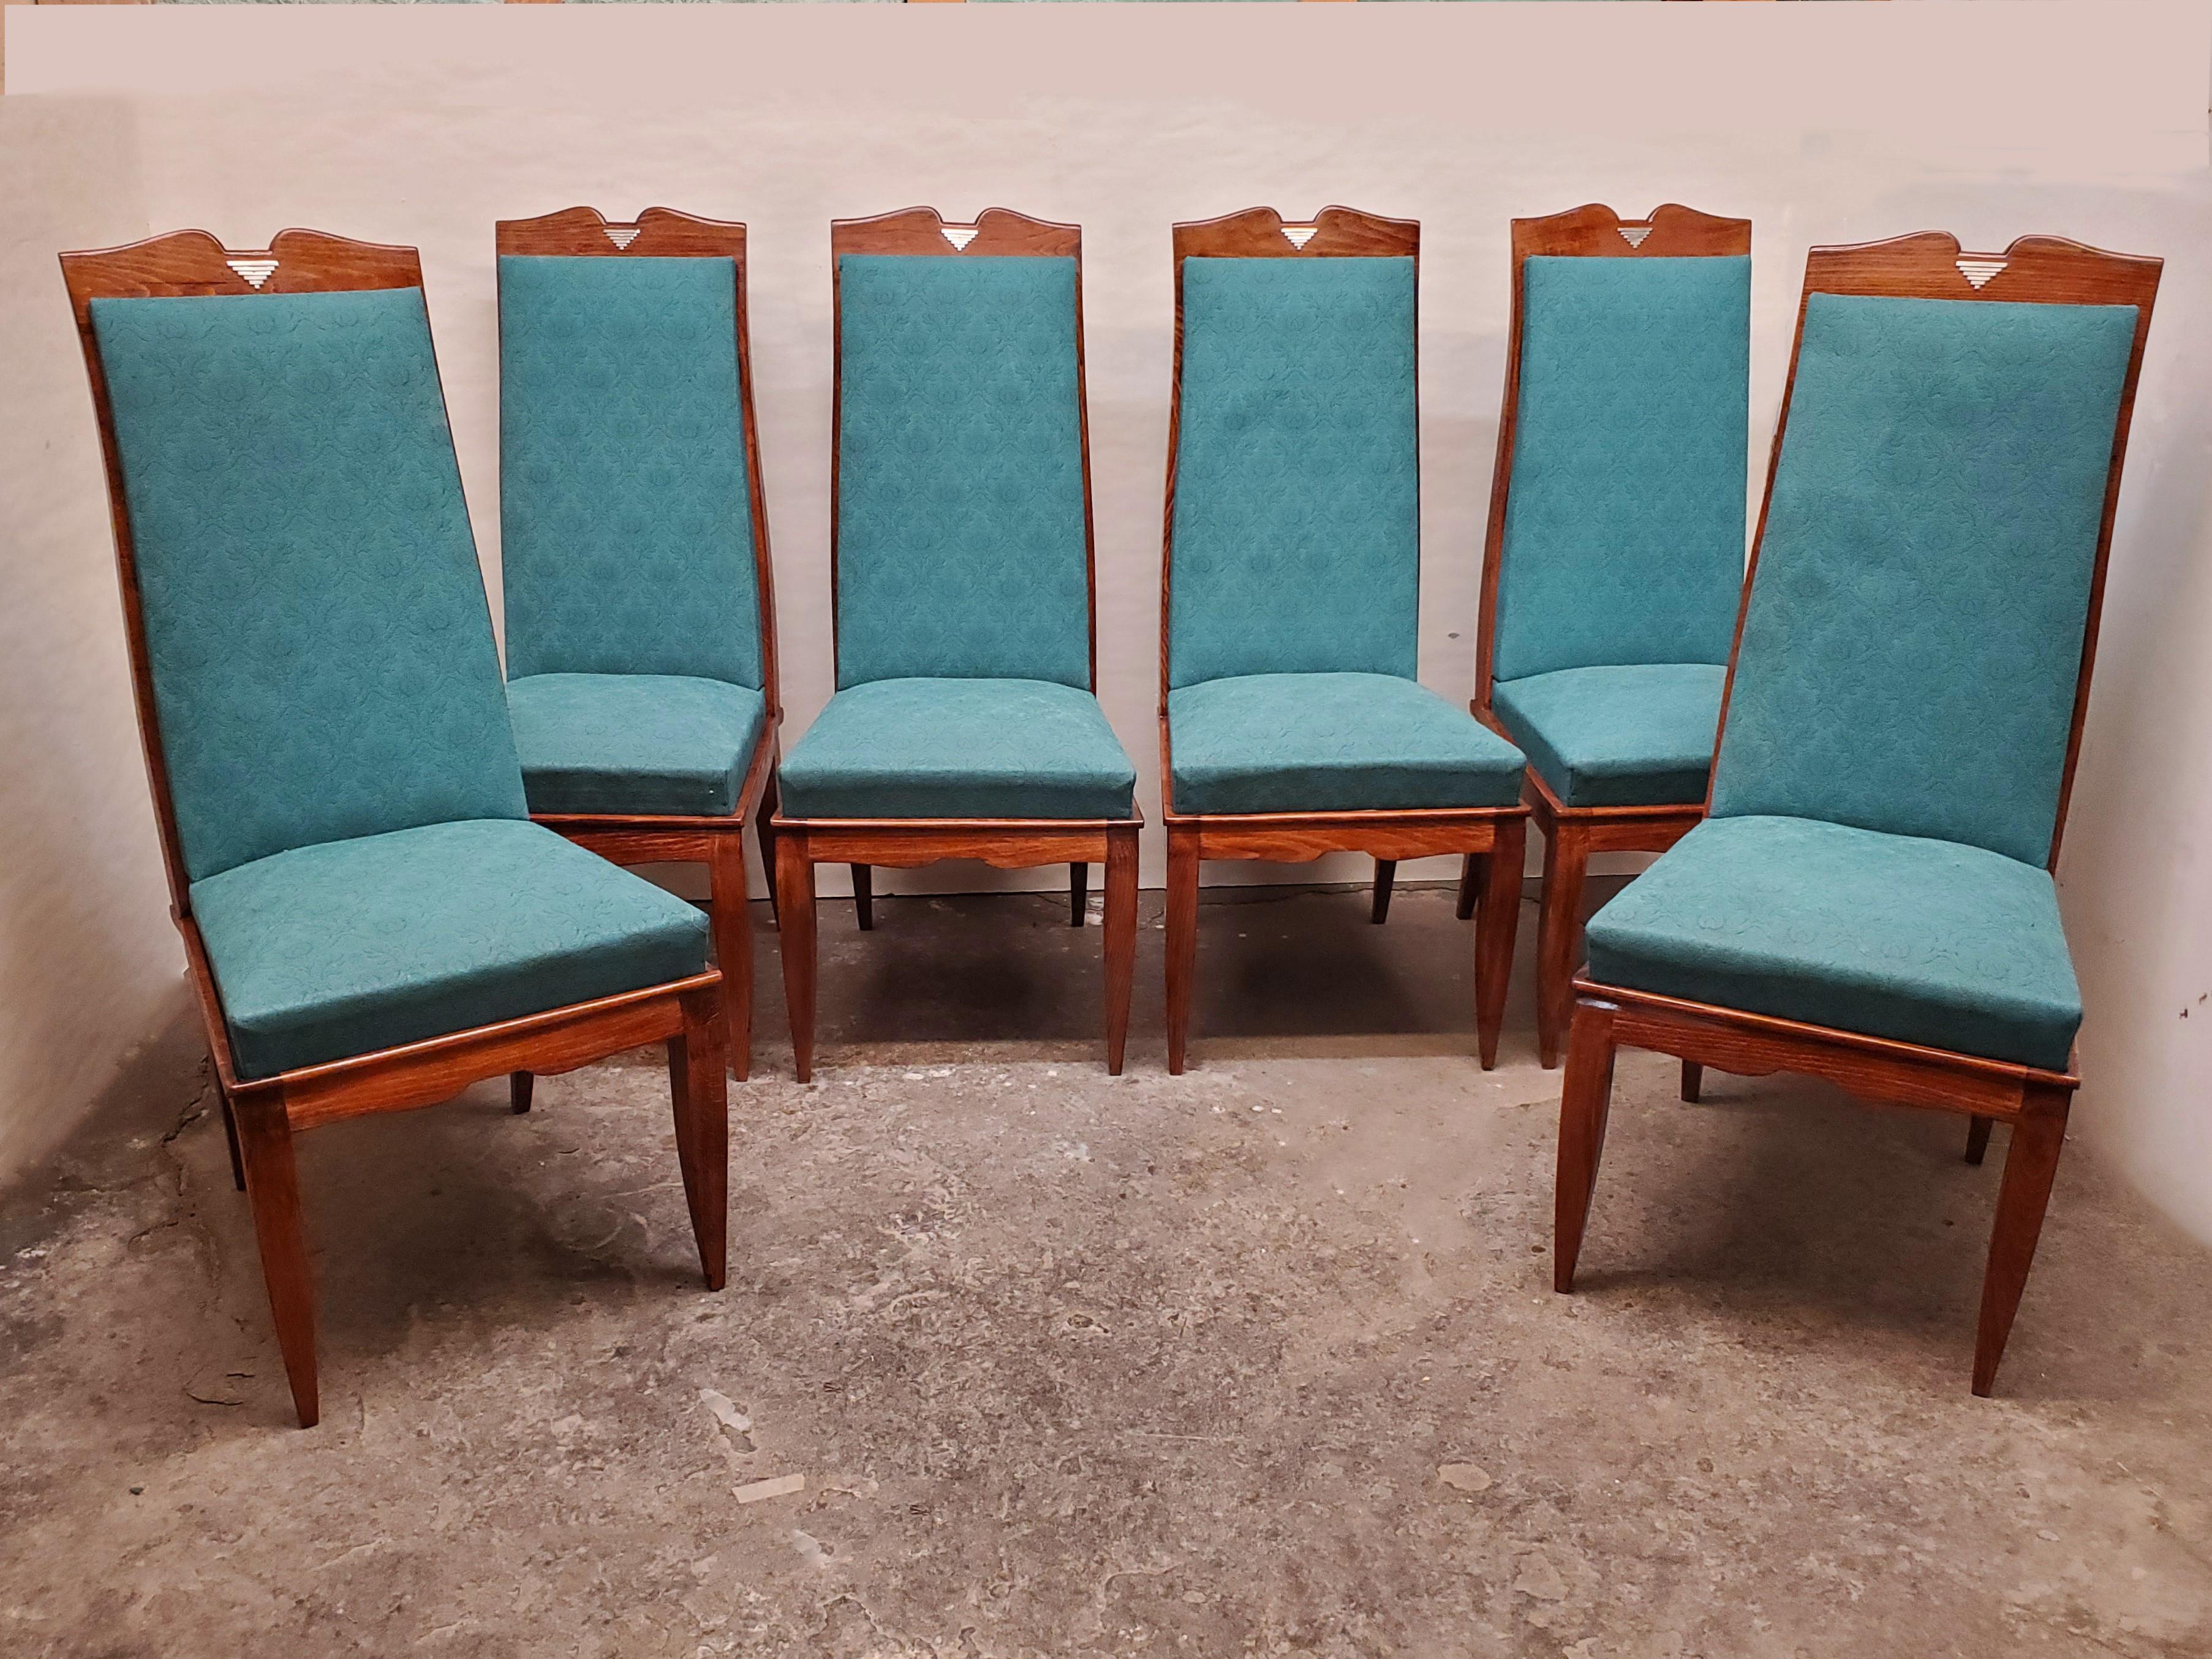 A set of six original French Mid-Century Modernist tall dining chairs featuring angular lines with a curved moustache shaped top, elegant tapered front cabriole legs and splay back legs.
The chairs are streamline in overall shape, featuring tall